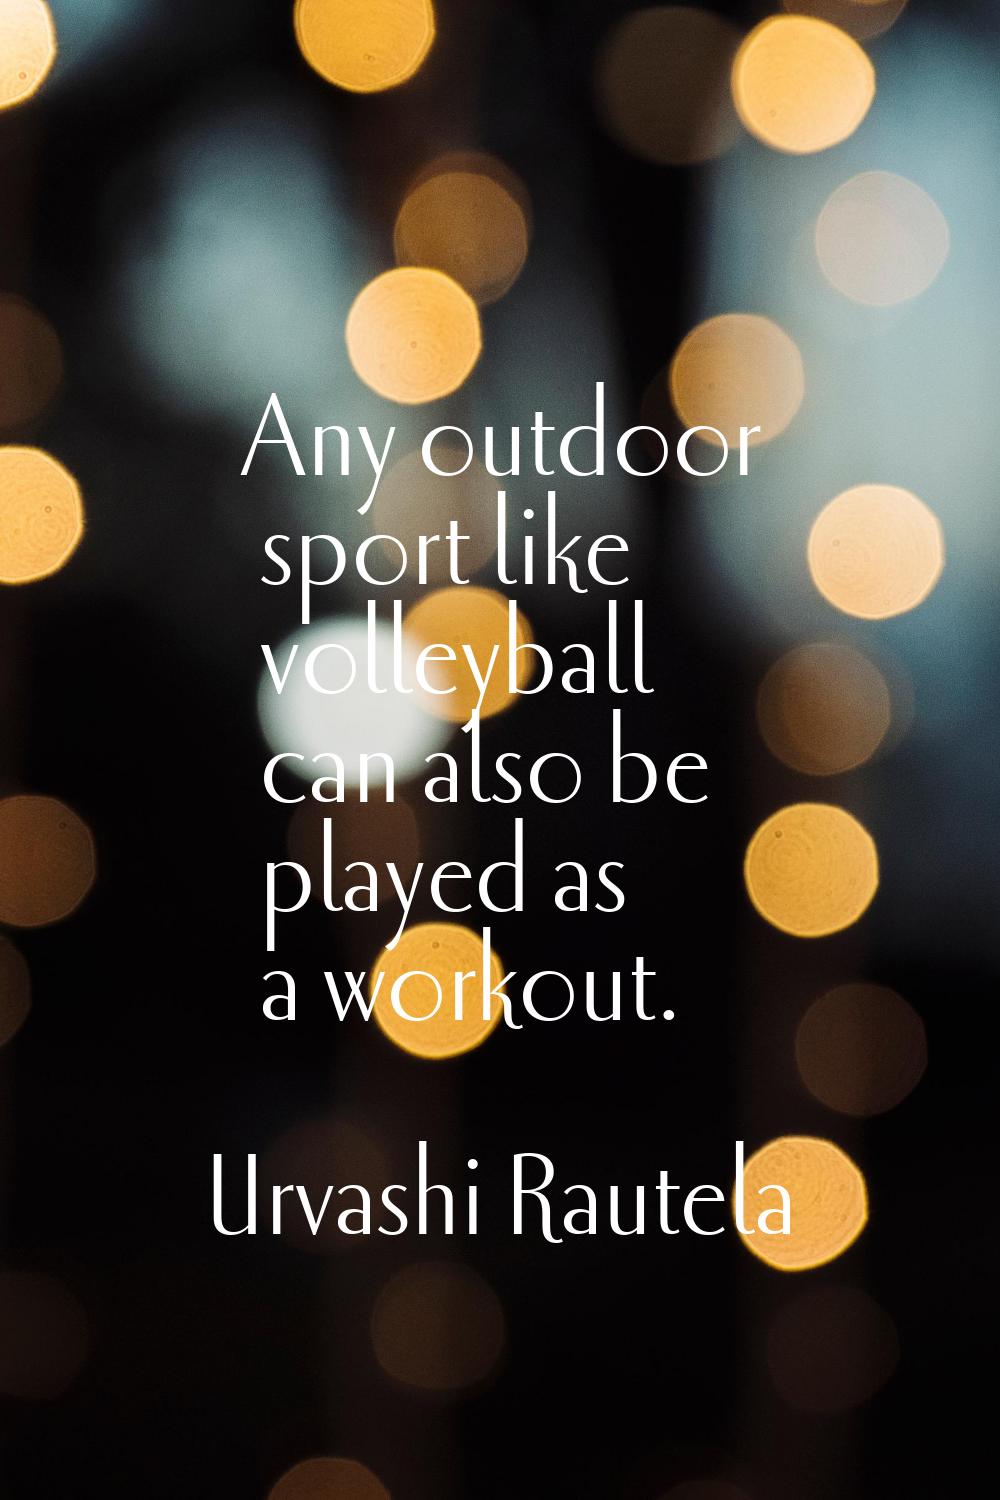 Any outdoor sport like volleyball can also be played as a workout.